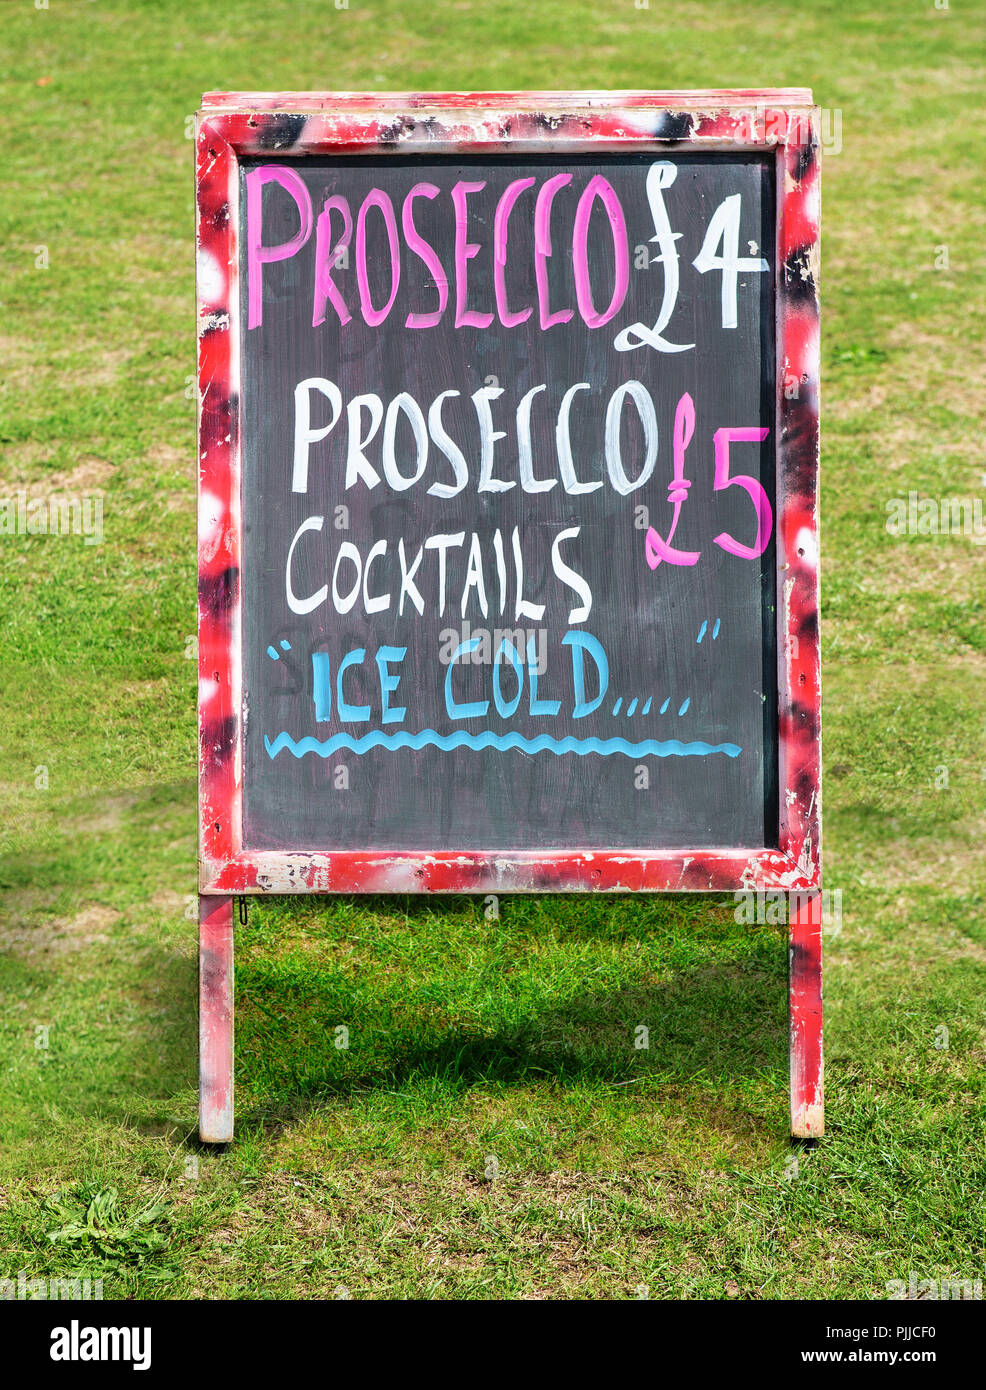 Prosecco and Cocktails Sign on a blackboard Stock Photo